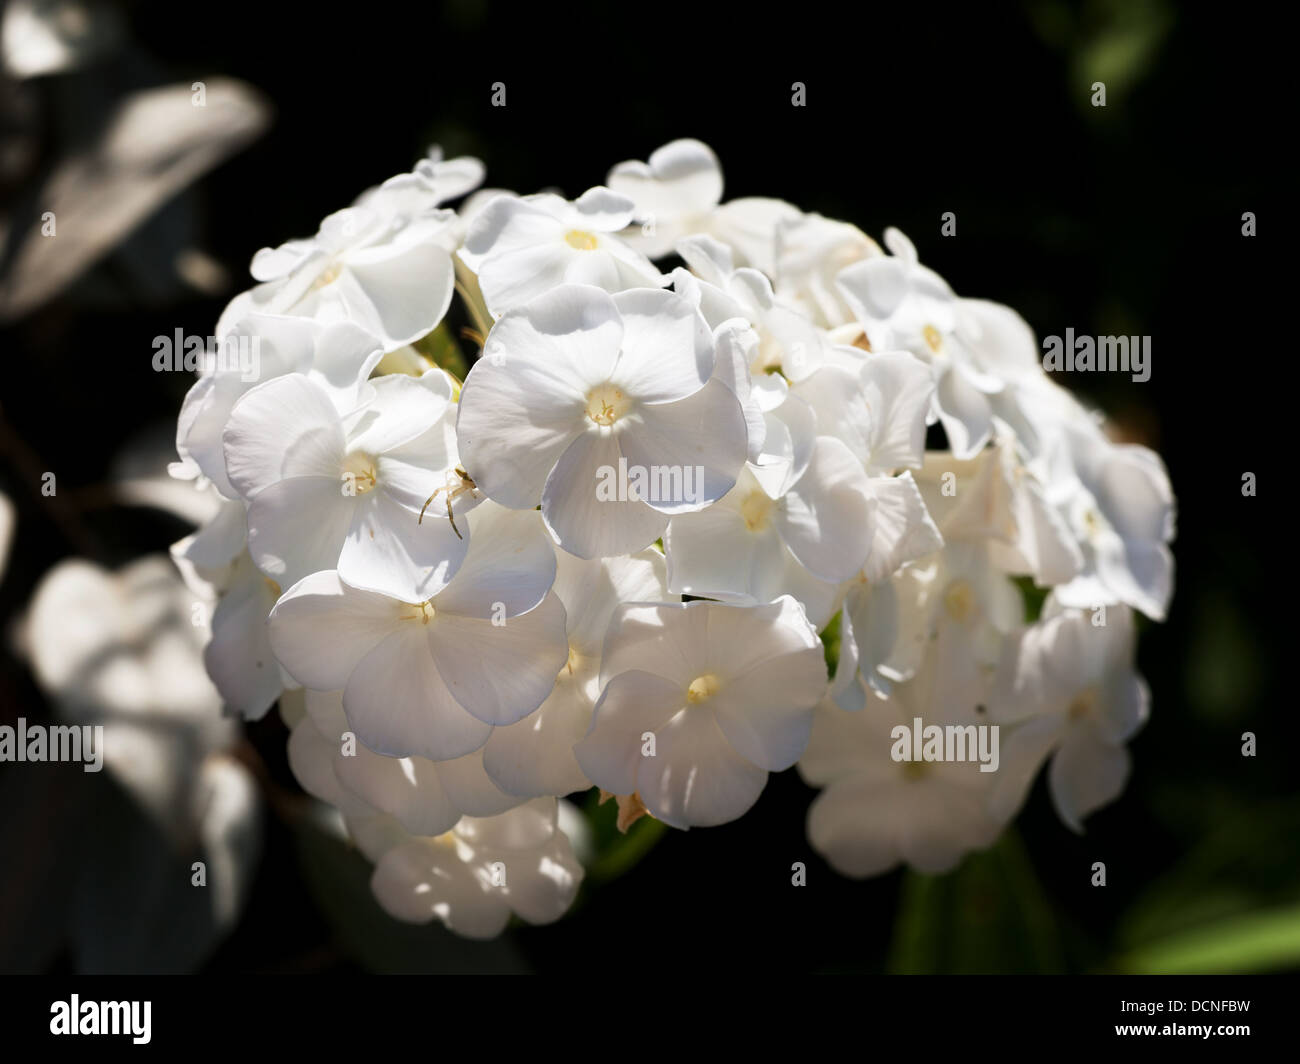 cluster of white flower Phlox close up Stock Photo